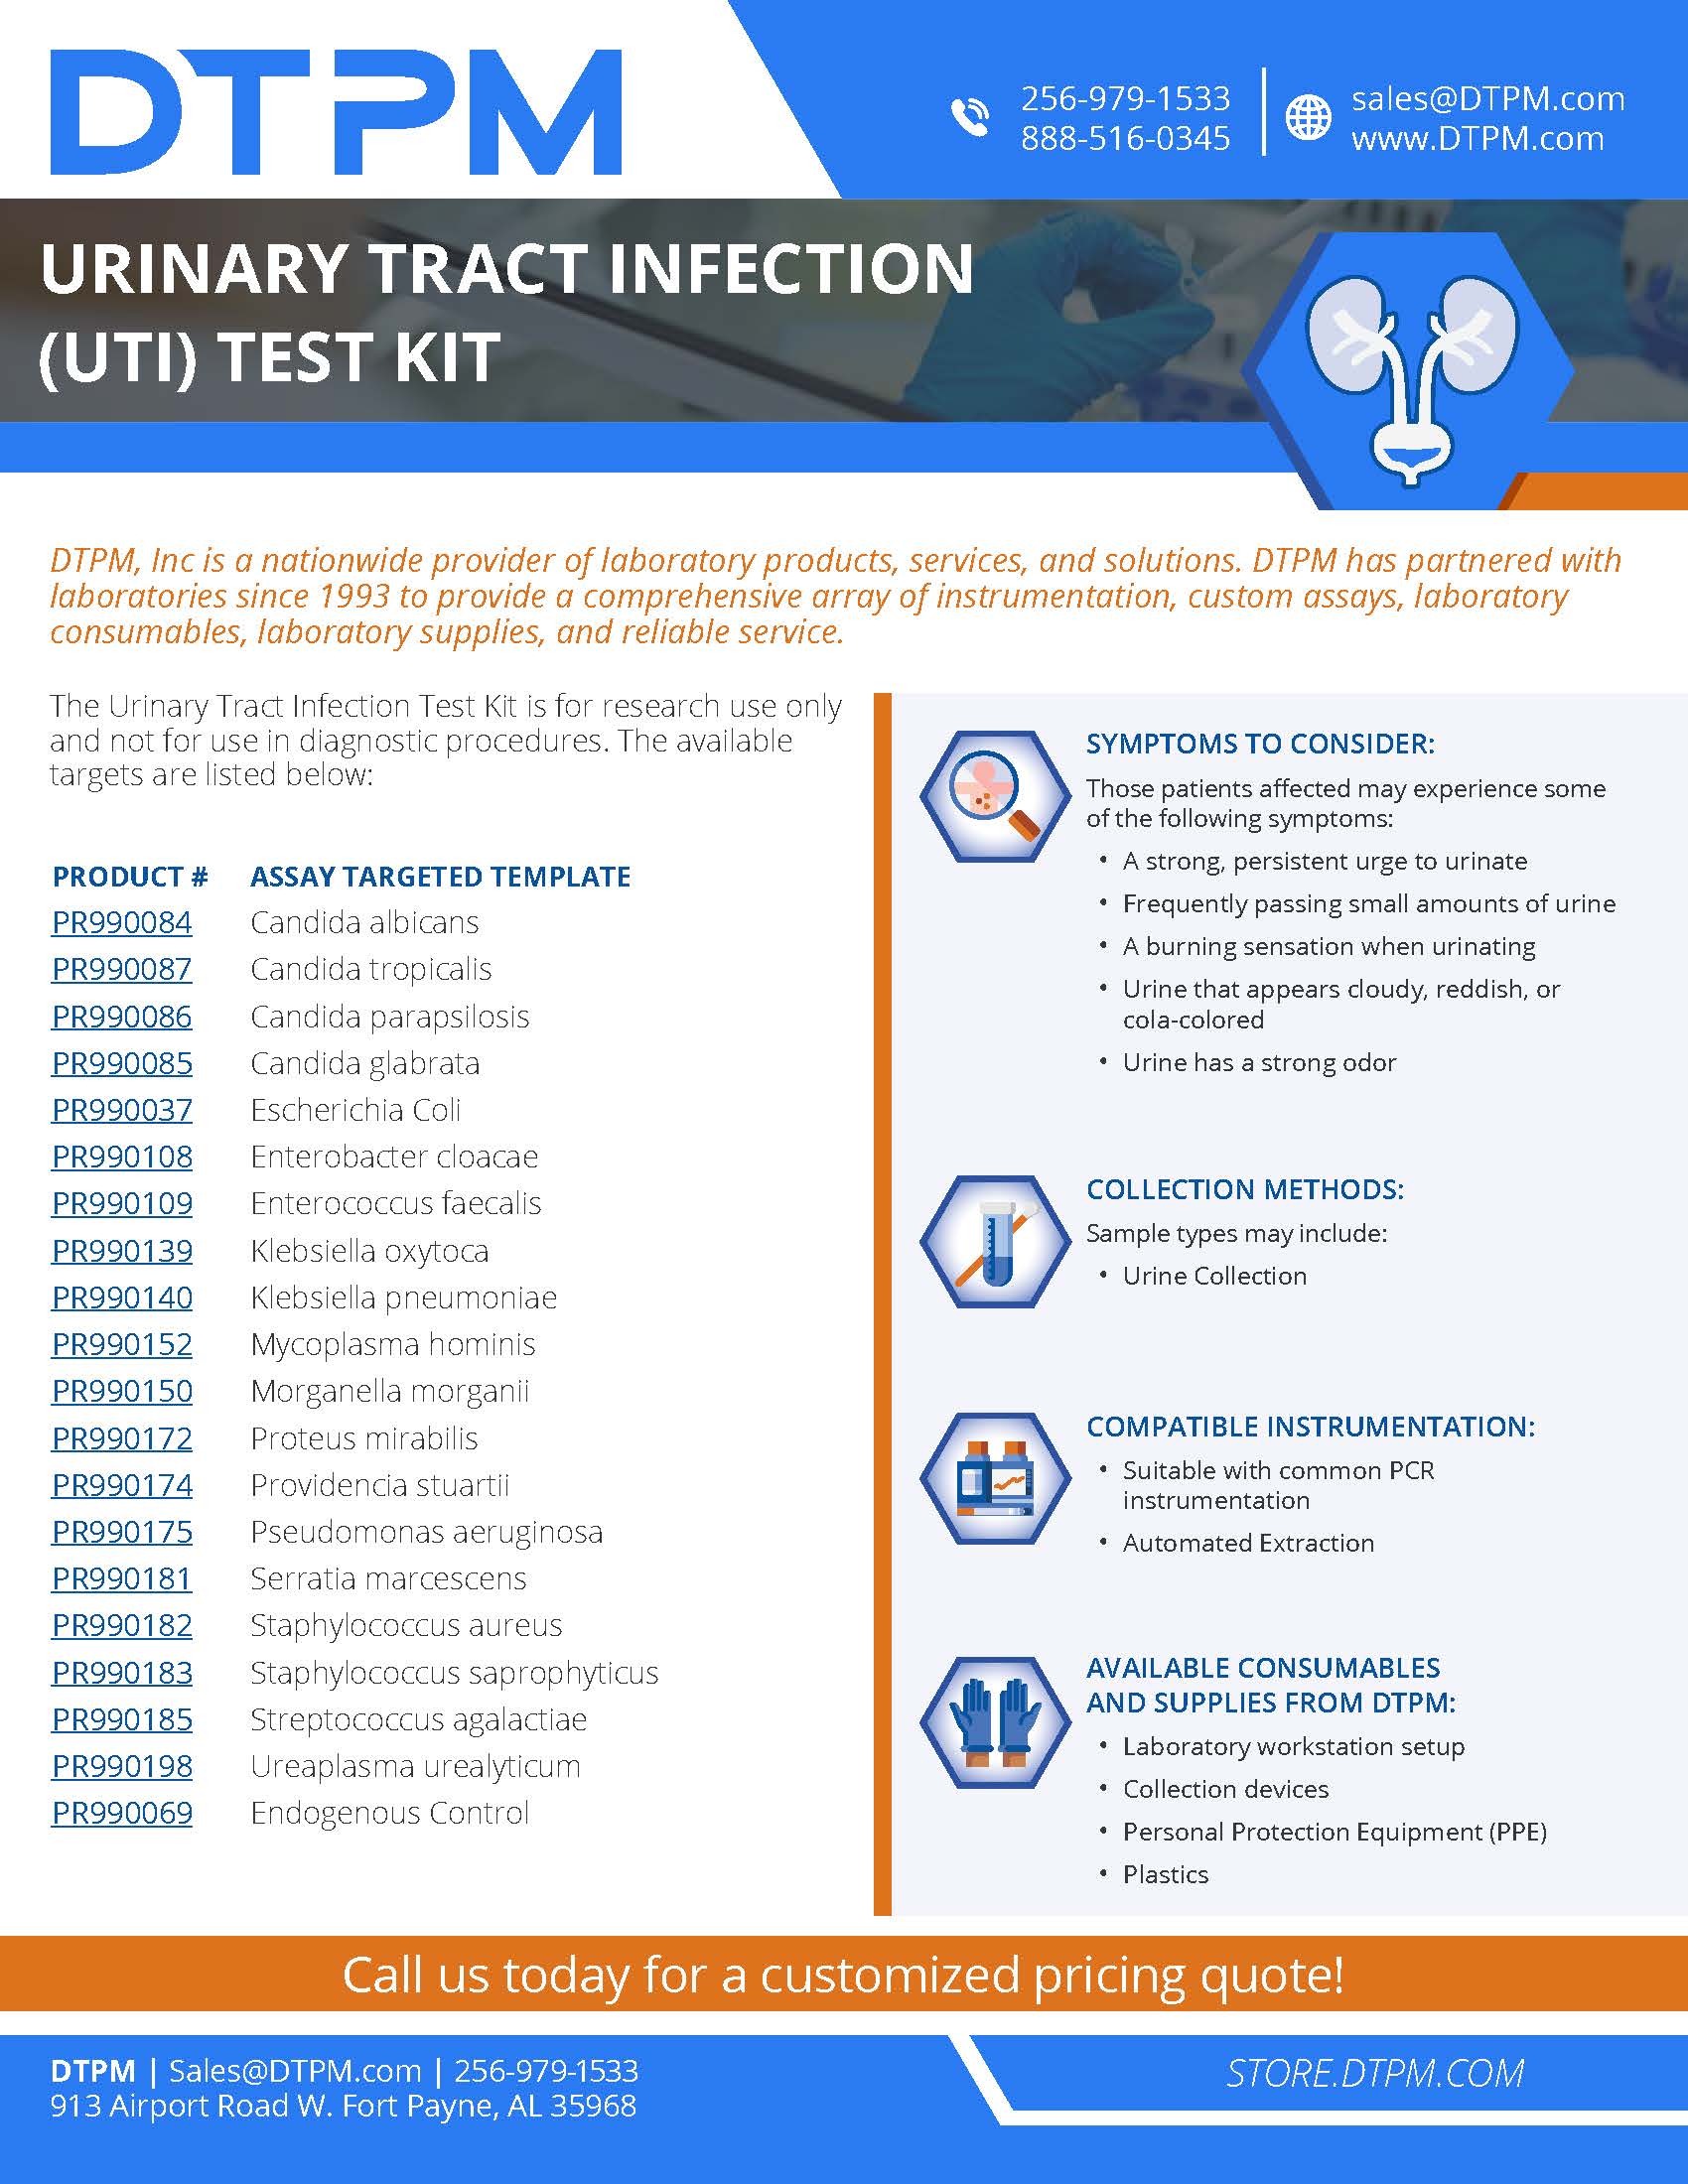 DTPM Urinary Tract Infection Test Kit